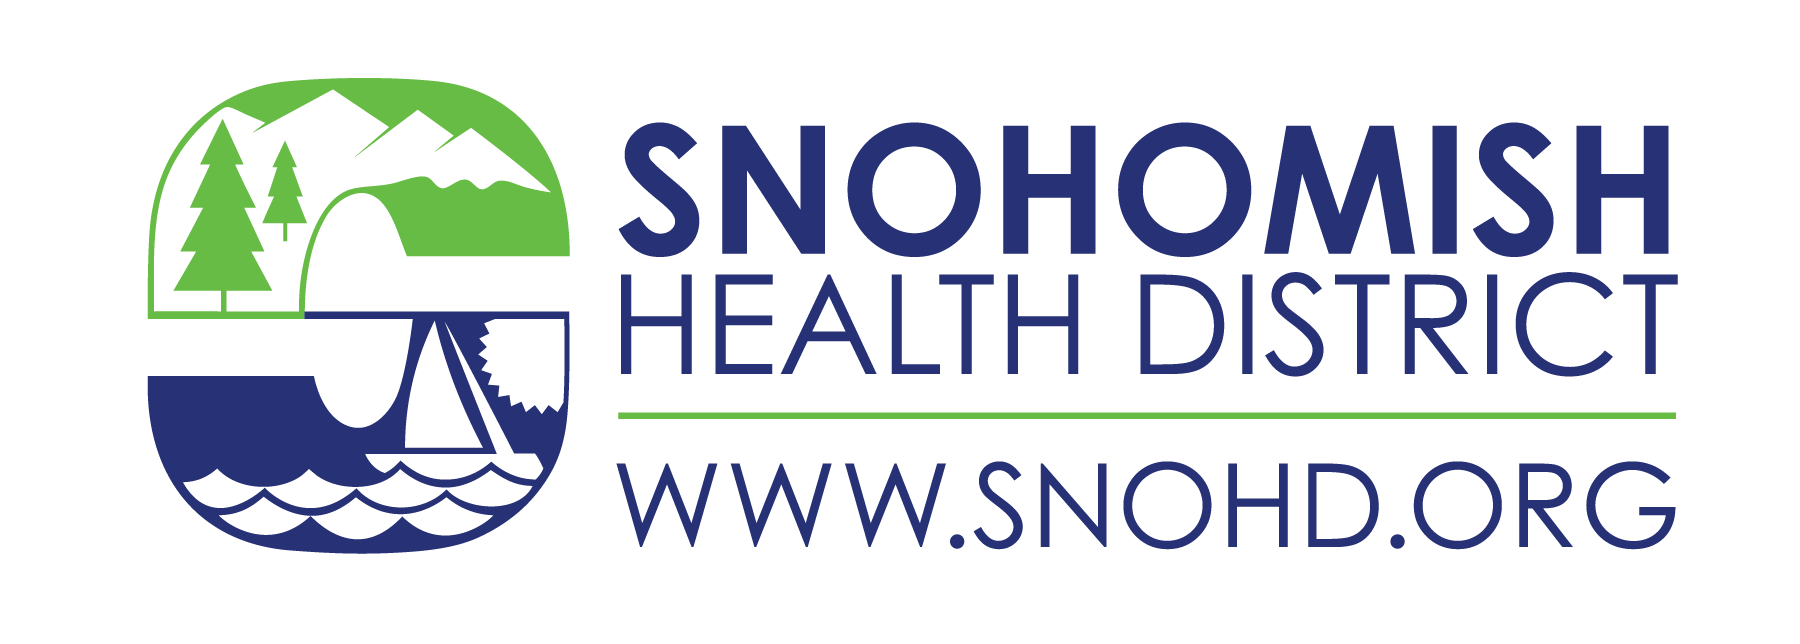 Snohomish Health District Vaccines - Community Vaccine Clinic (12+ Y/O) 8 Logo